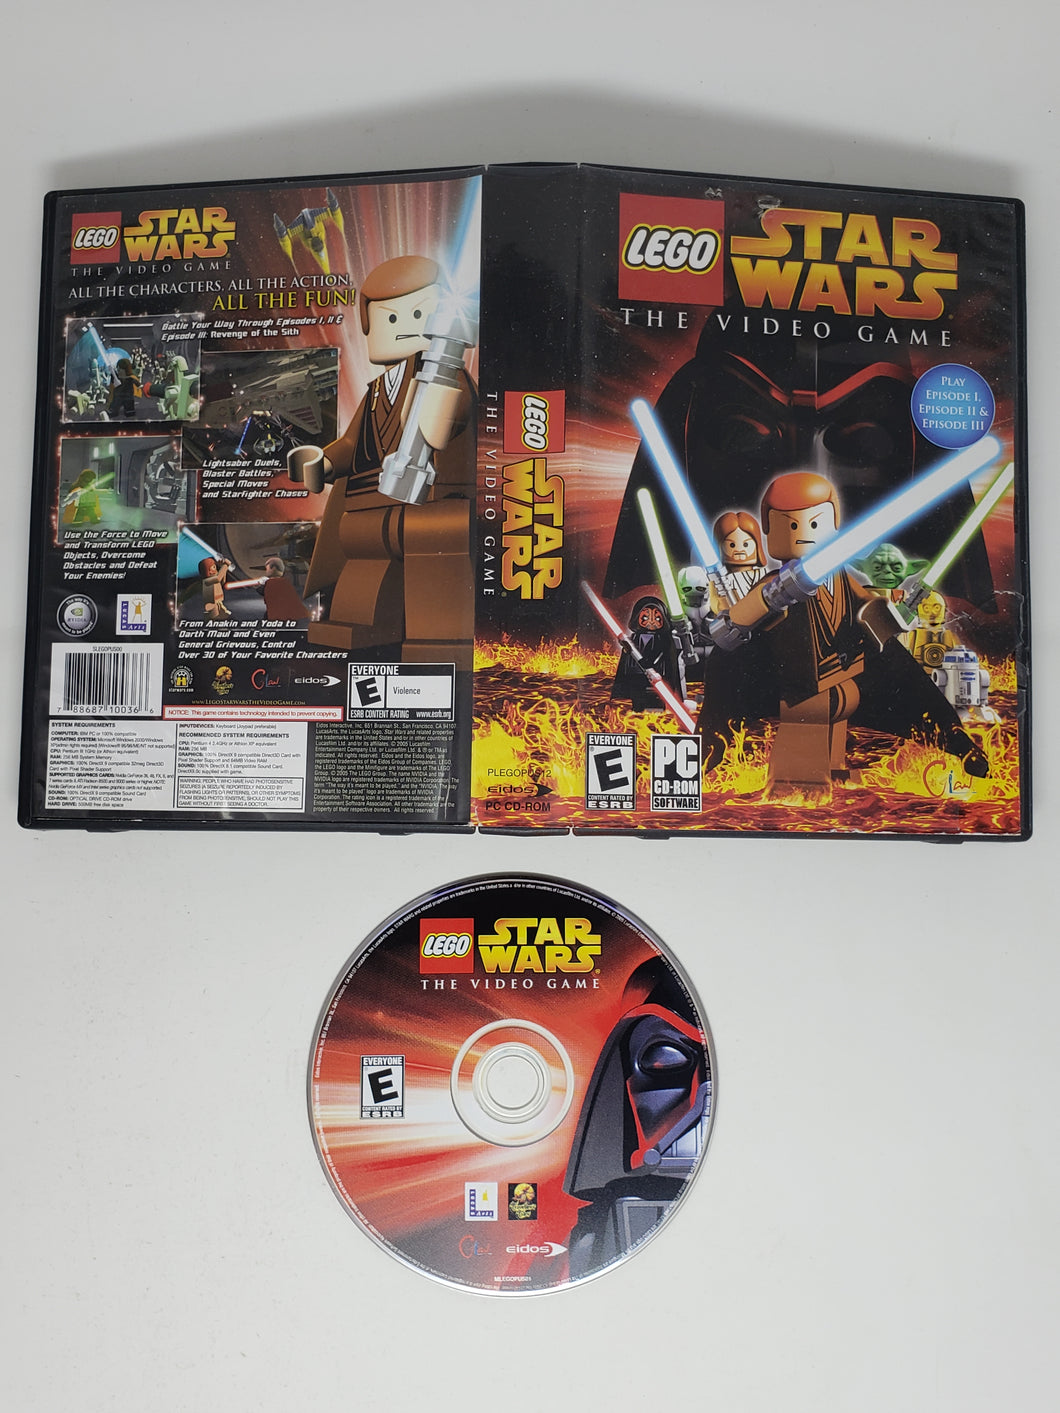 LEGO Star Wars The Videogame - PC Game